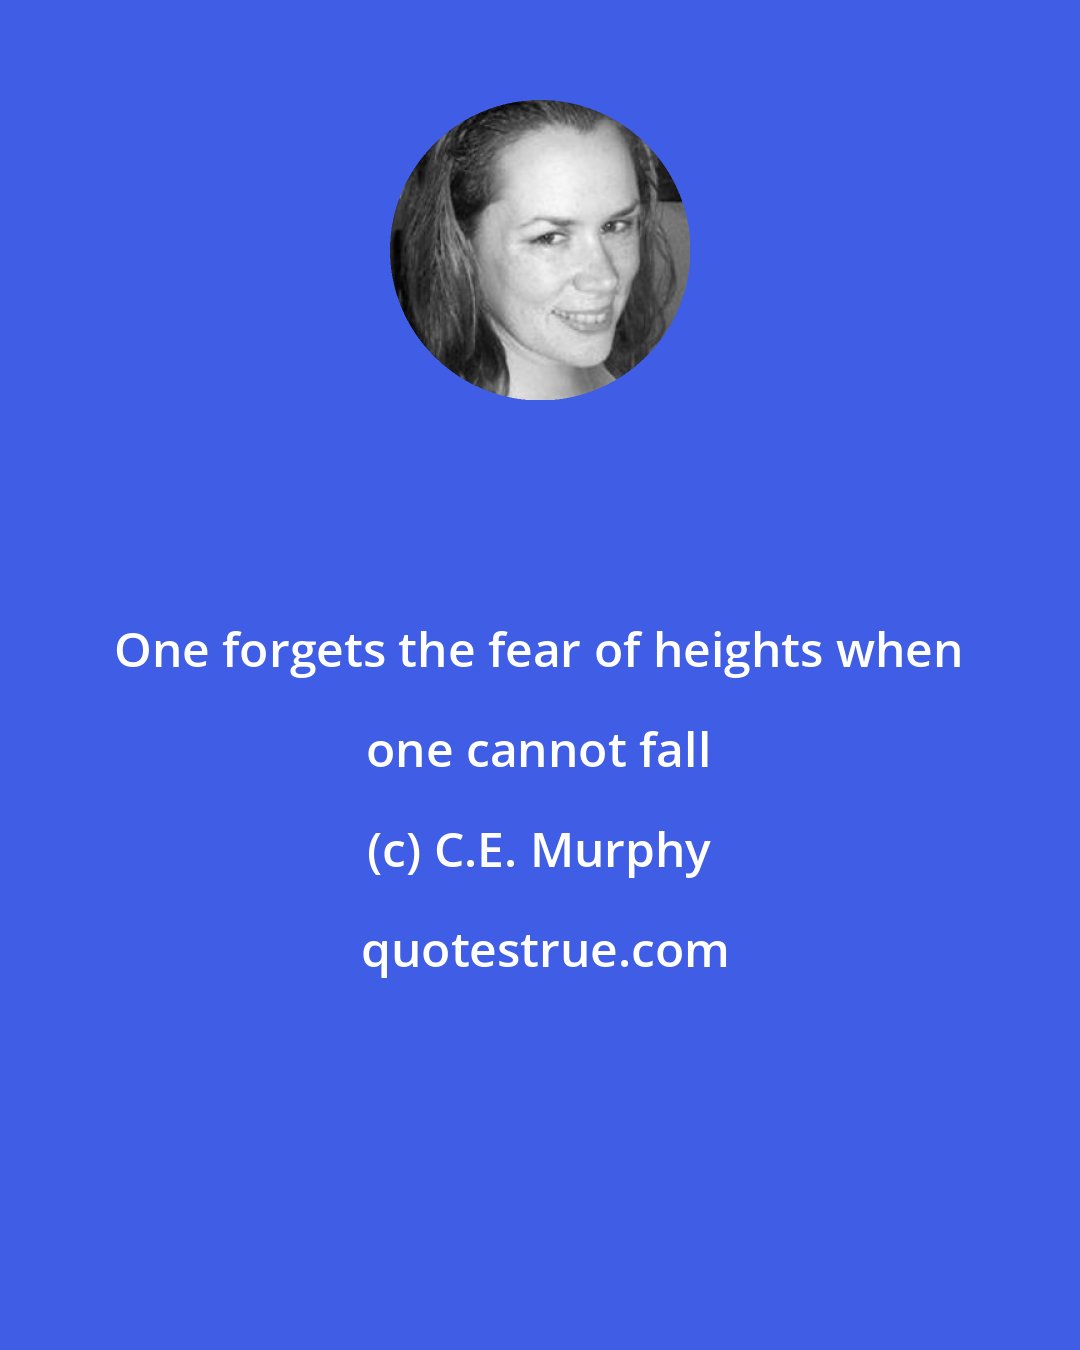 C.E. Murphy: One forgets the fear of heights when one cannot fall